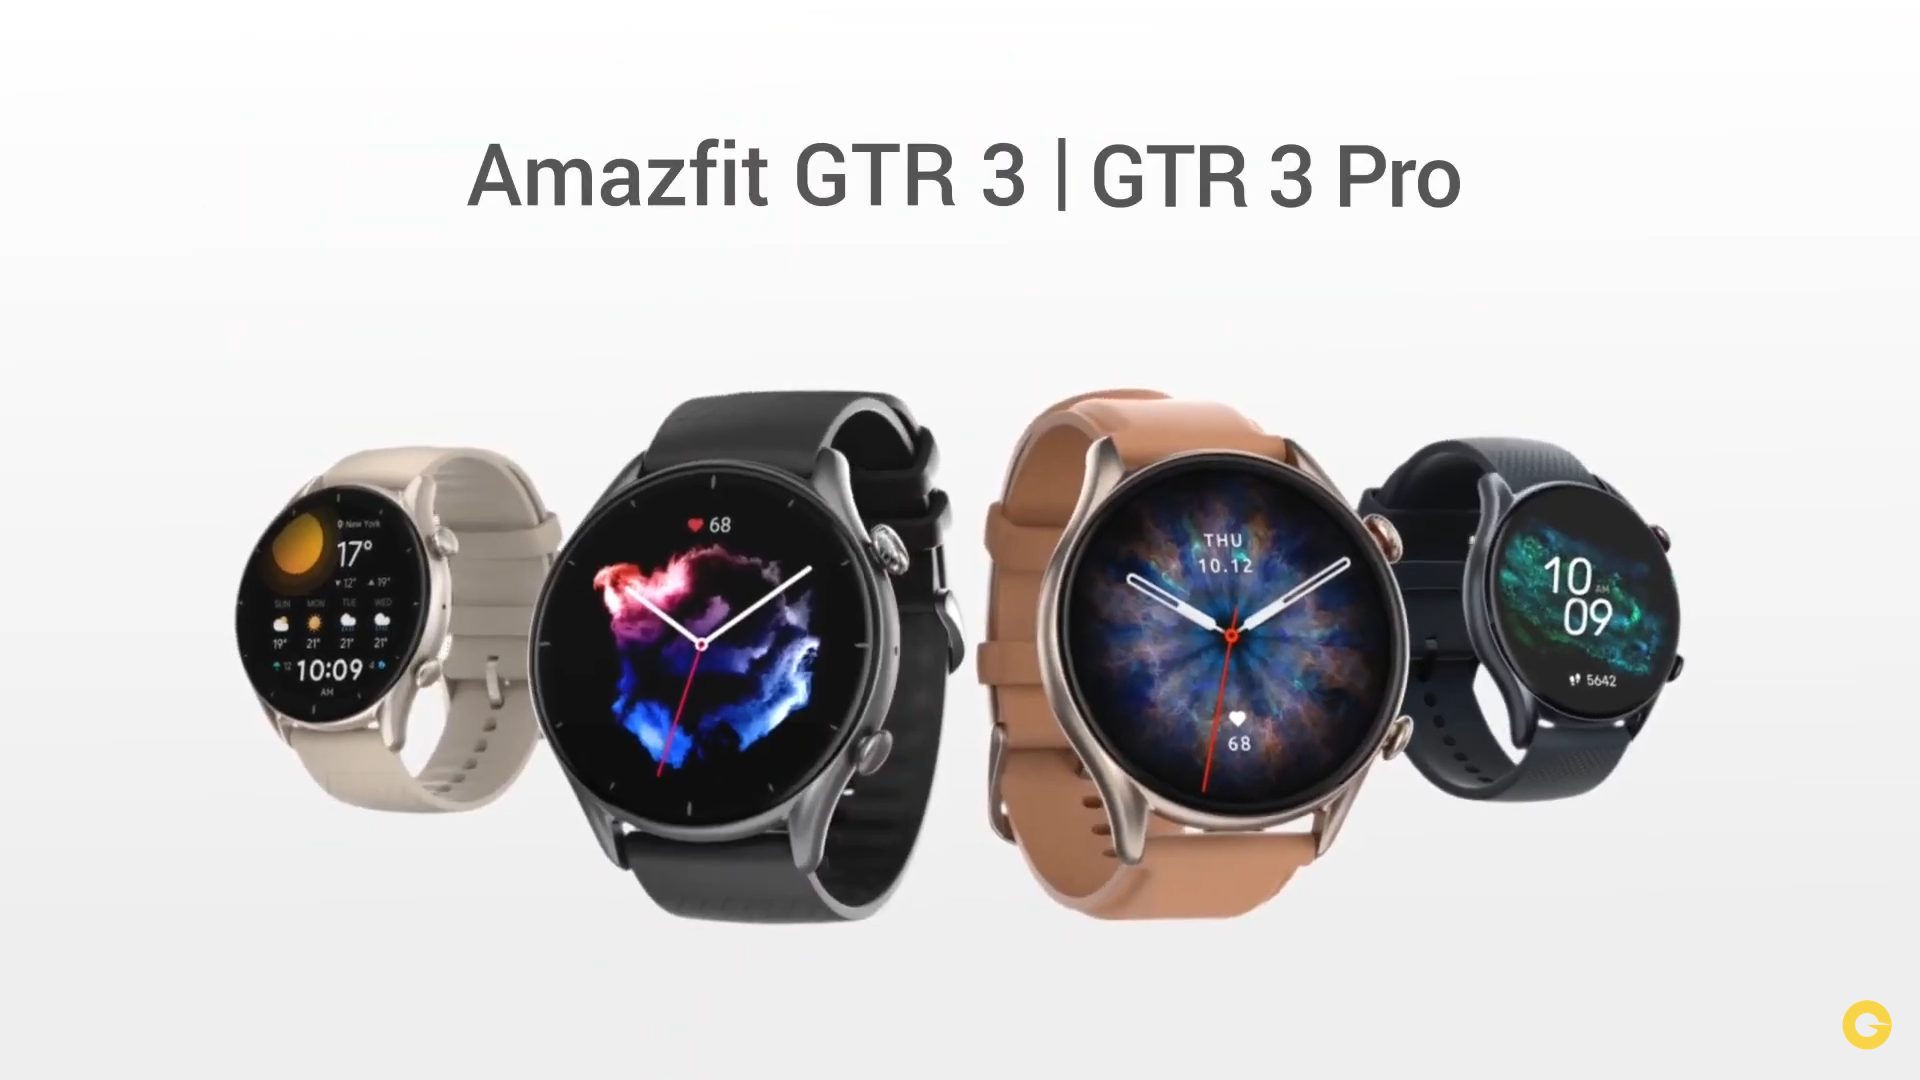 Amazfit GTR 3, GTR 3 Pro, GTS 3 launched in India: All you need to know